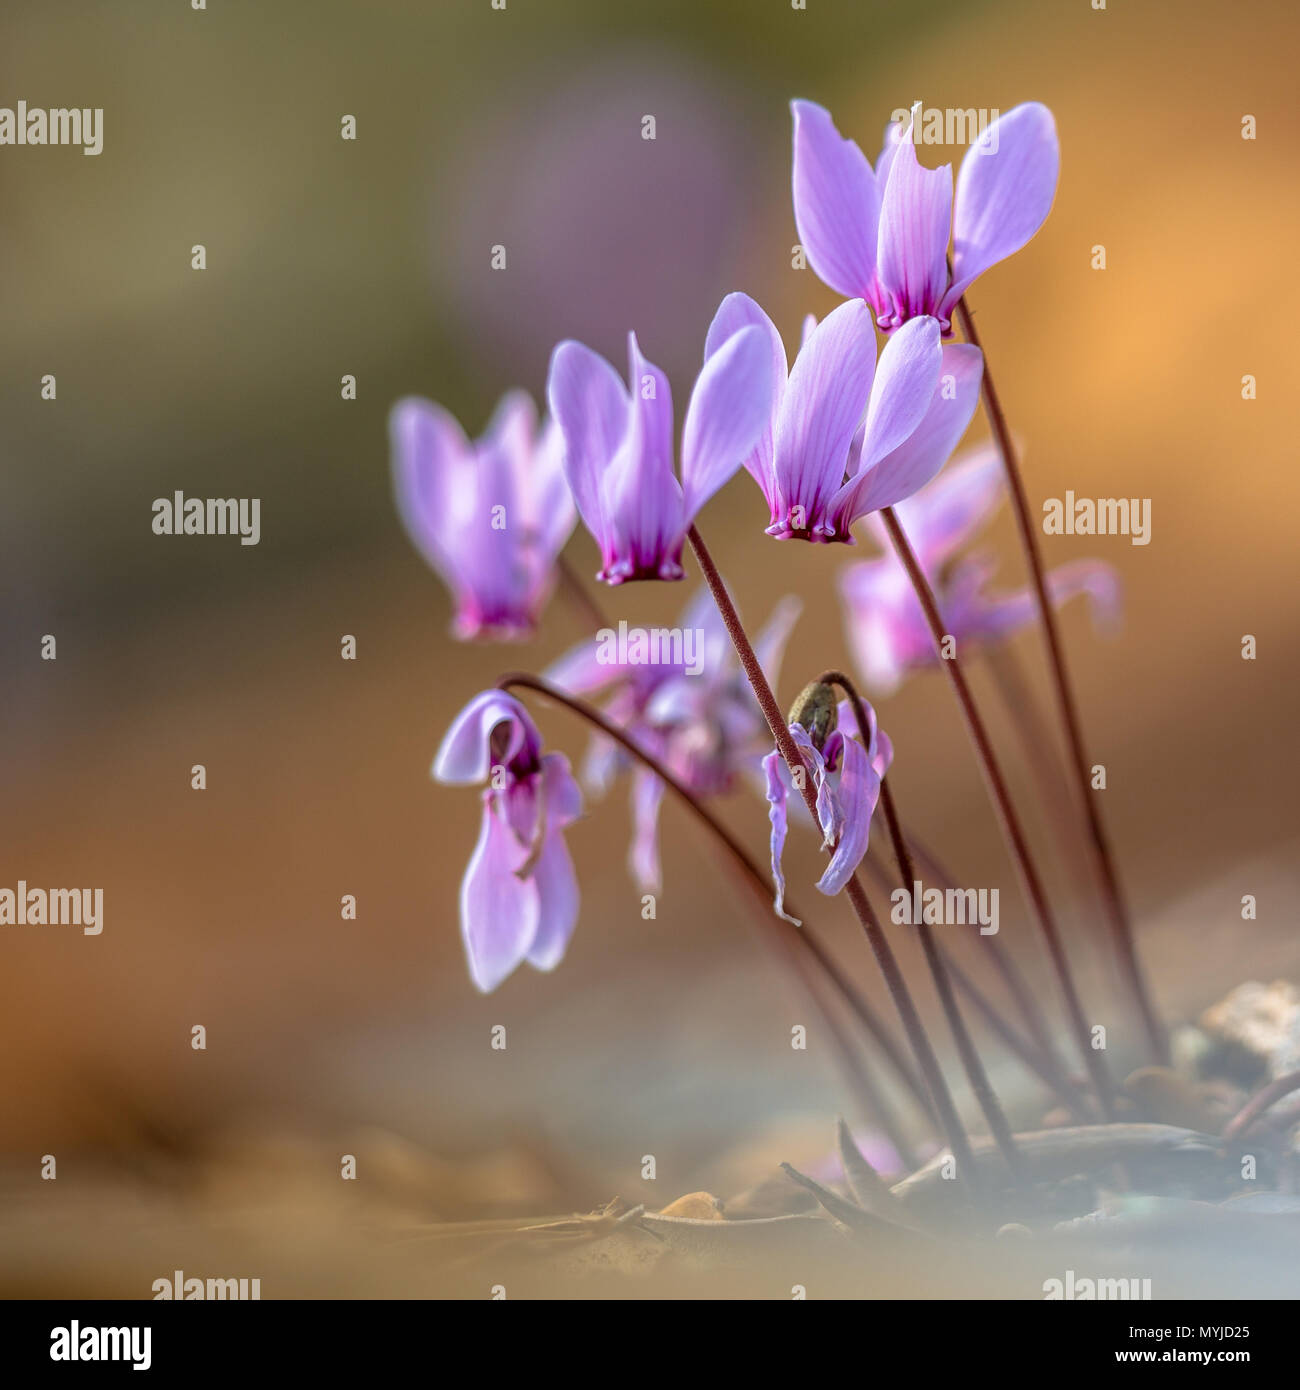 Group of Ivy-leaved cyclamen or sowbread (Cyclamen hederifolium) in bloom on bright background Stock Photo